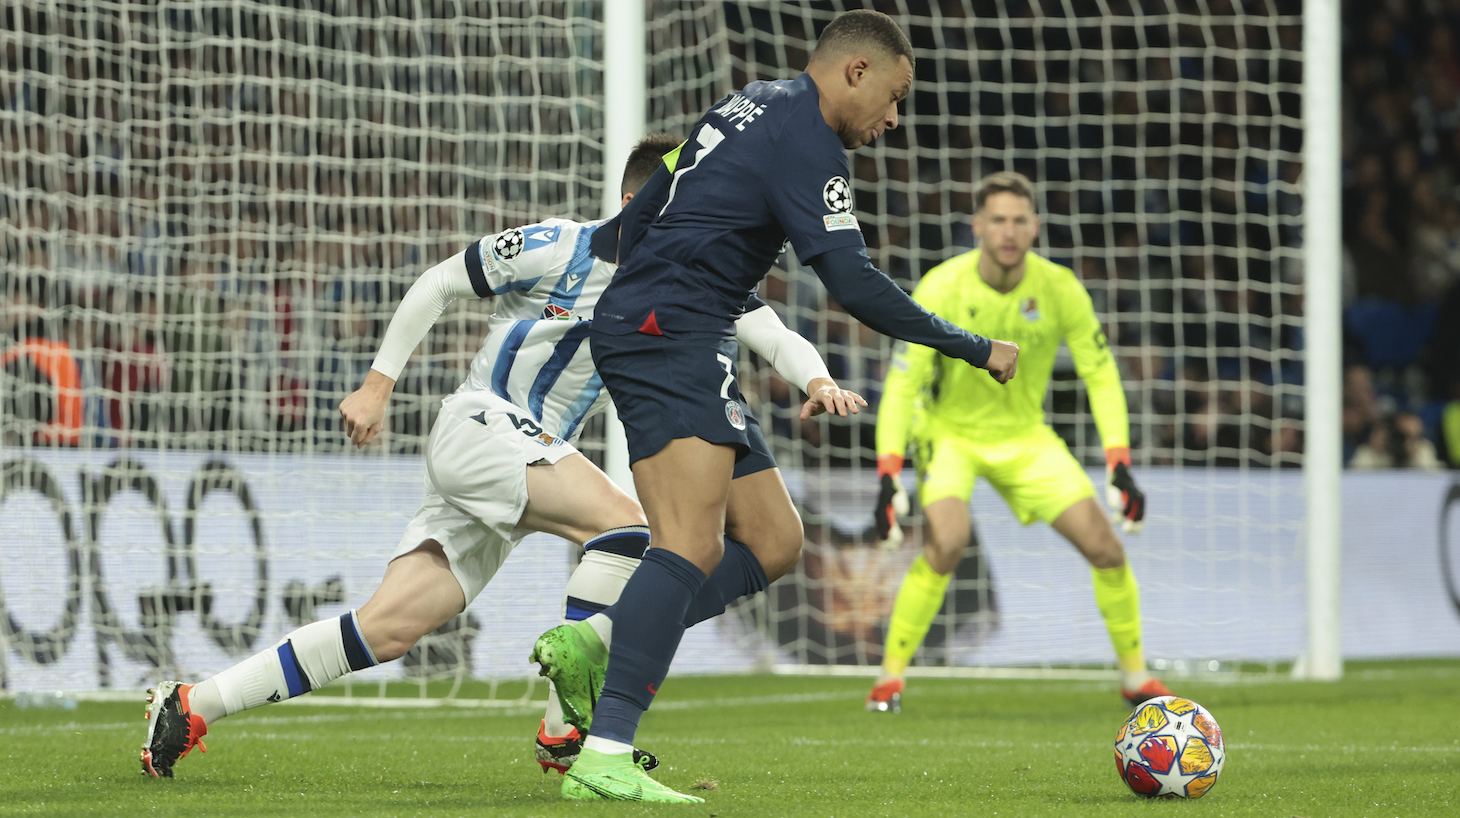 Kylian Mbappe of PSG in action during the UEFA Champions League 2023/24 round of 16 second leg match between Real Sociedad and Paris Saint-Germain at Reale Arena, Estadio de Anoeta on March 5, 2024 in San Sebastian, Spain.